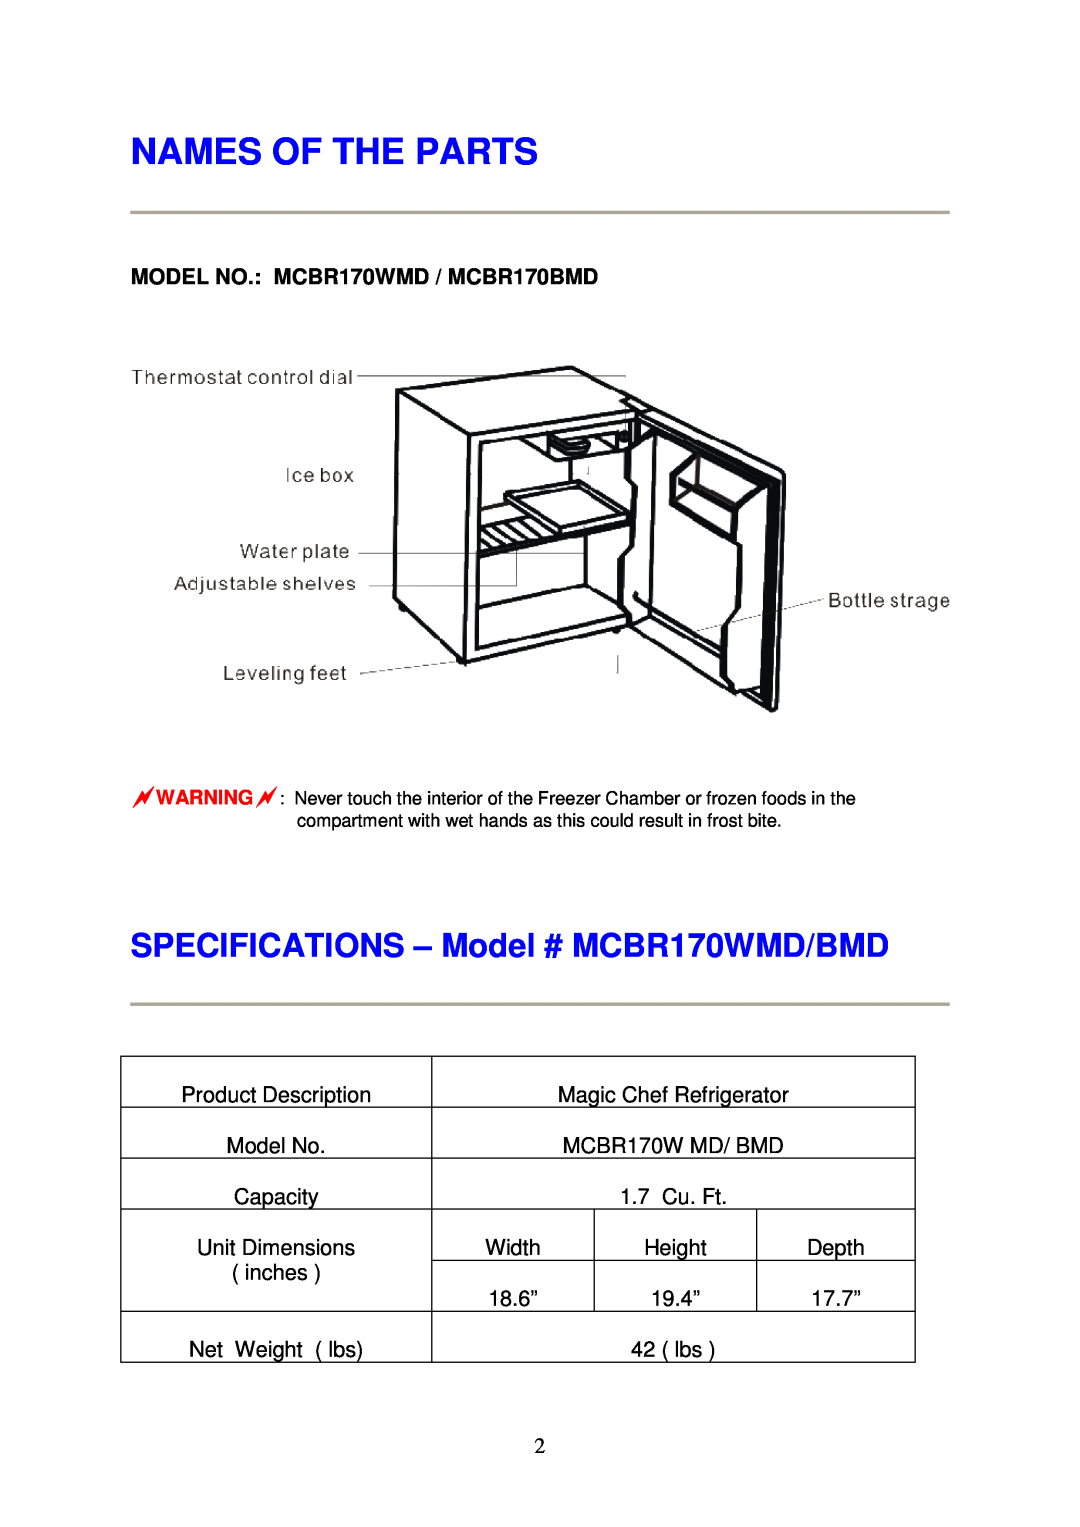 Magic Chef Names Of The Parts, MODEL NO. MCBR170WMD / MCBR170BMD, SPECIFICATIONS - Model # MCBR170WMD/BMD 